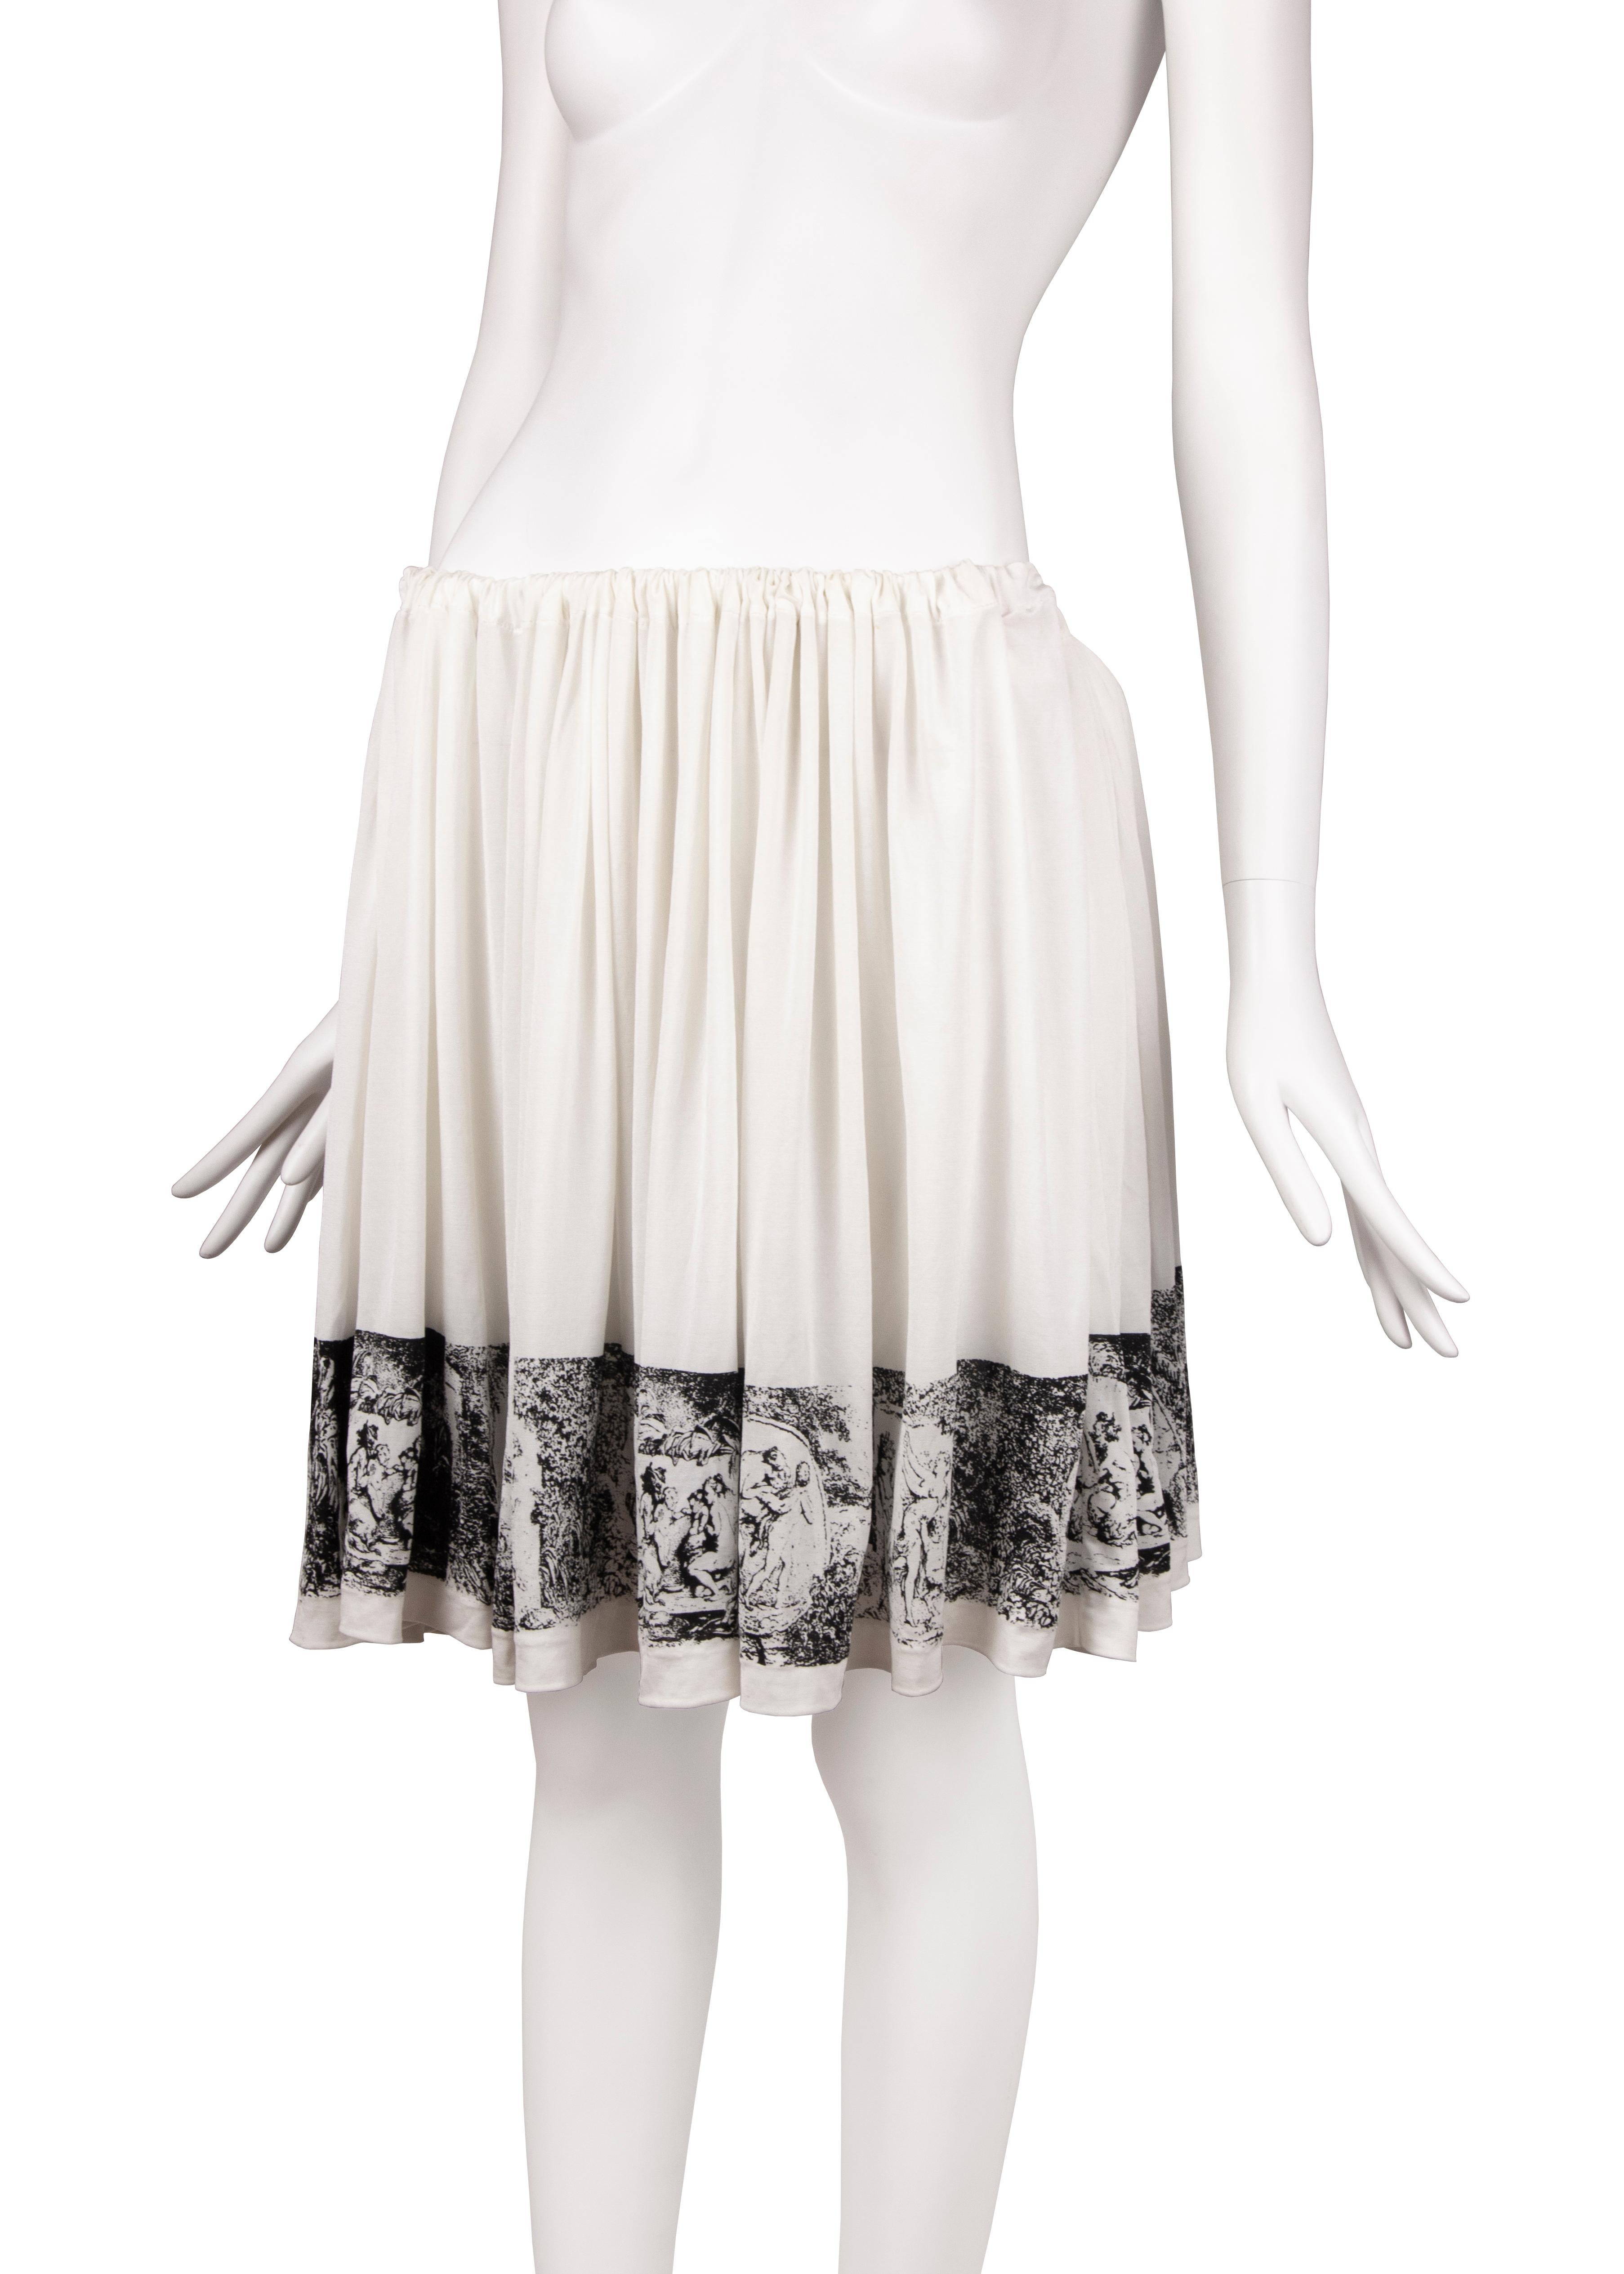 Vivienne Westwood 'Pagan' bustle skirt, ss 1988 In Good Condition In Melbourne, AU